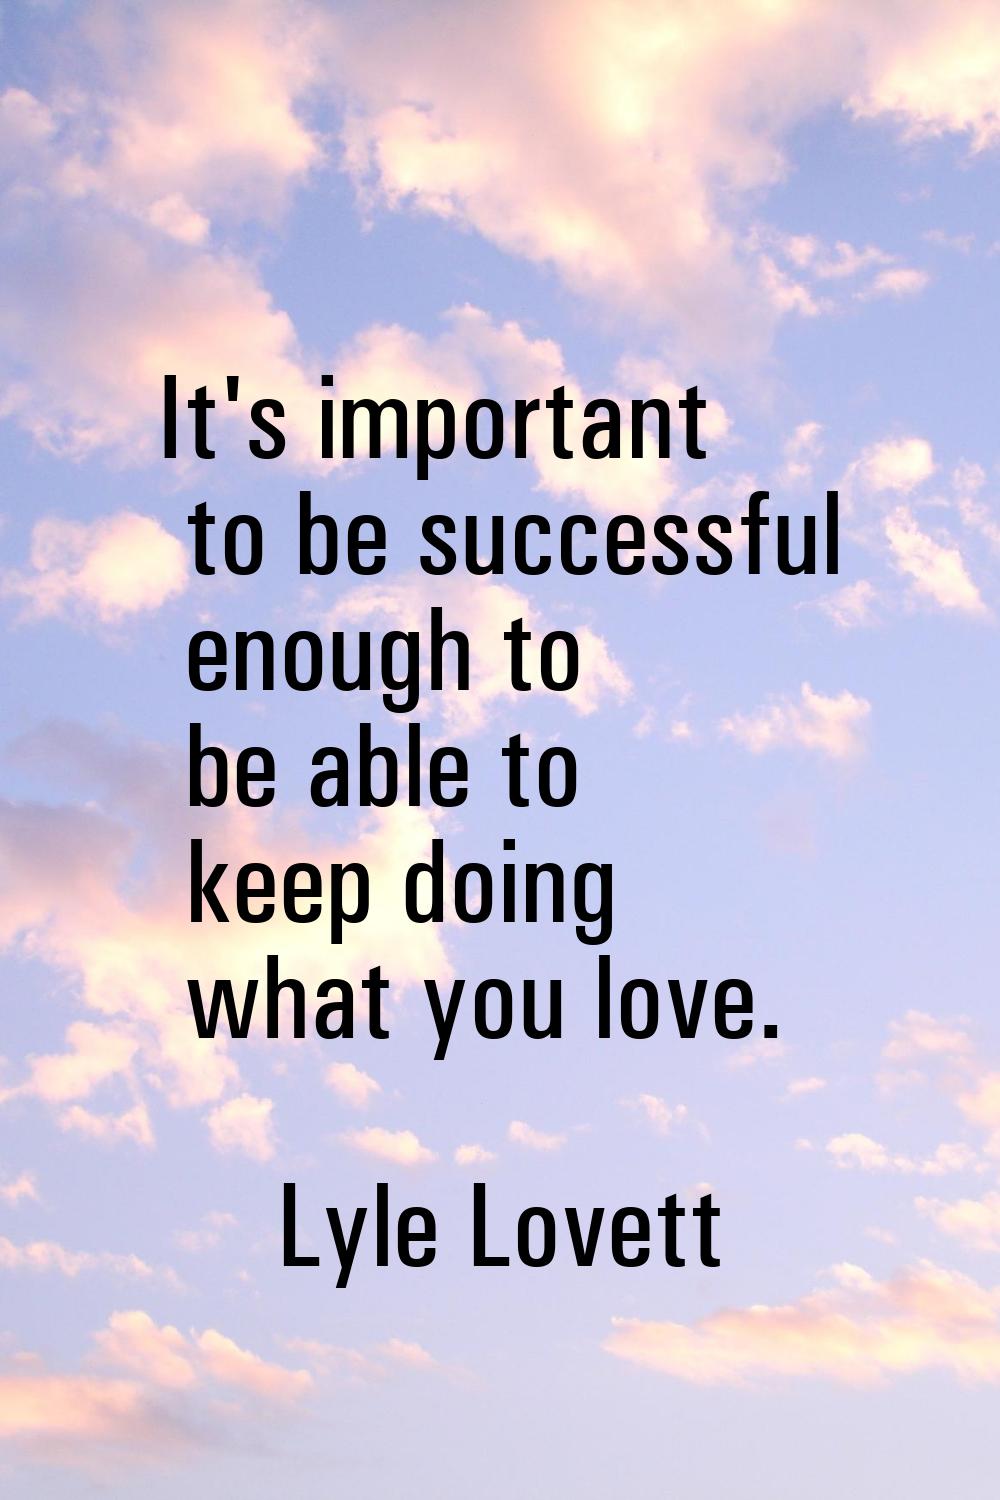 It's important to be successful enough to be able to keep doing what you love.